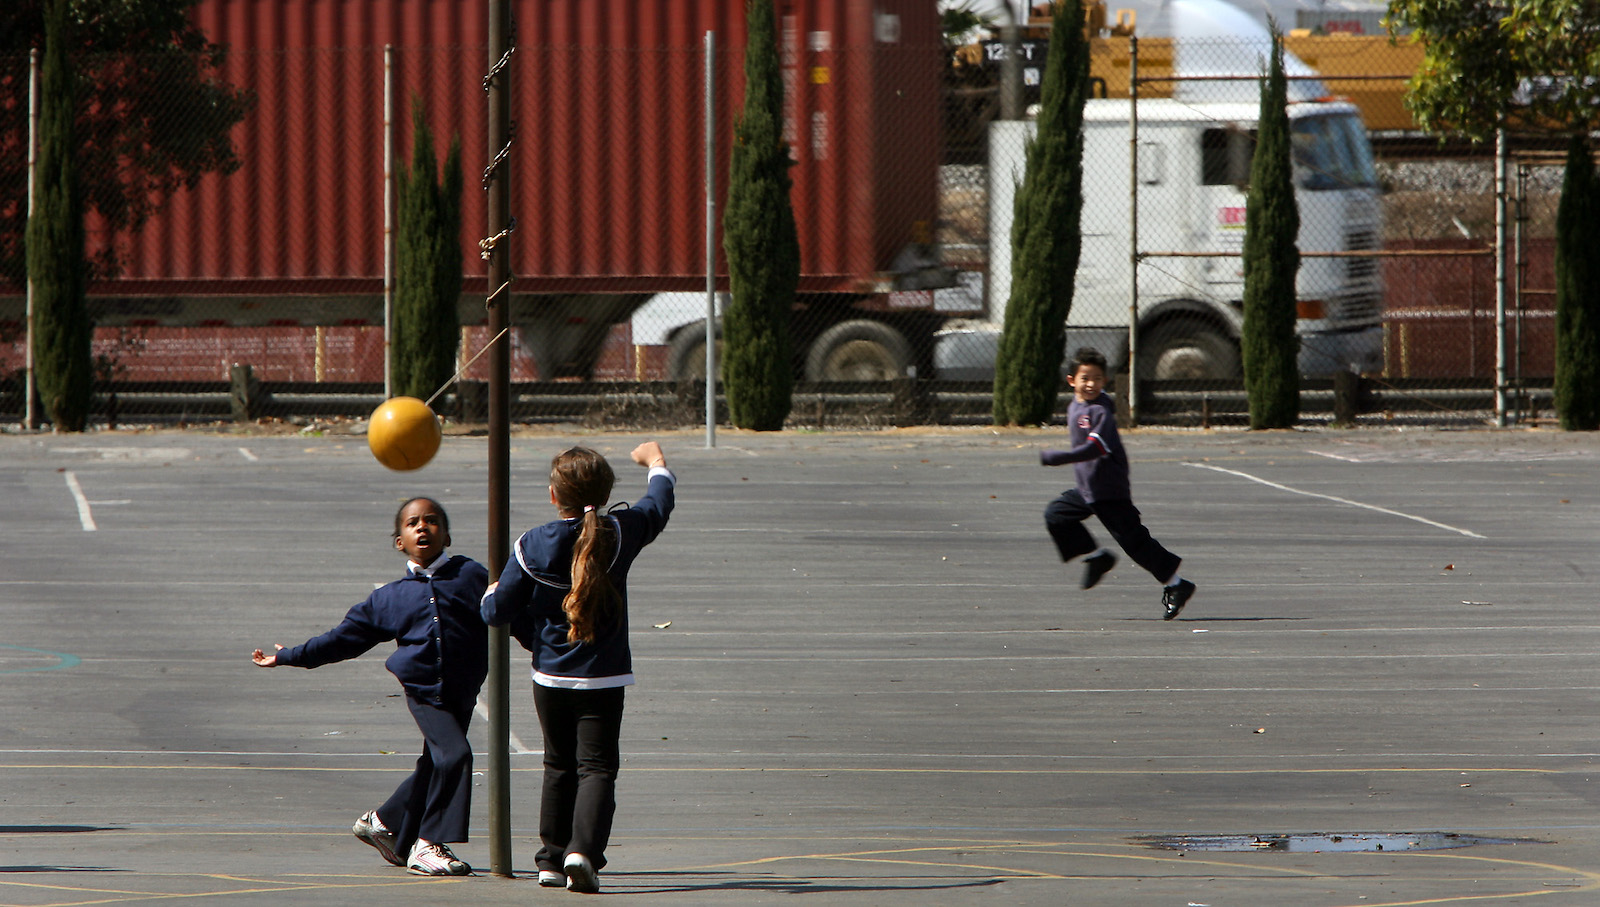 Children play tetherball during recess at a Los Angeles elementary school.